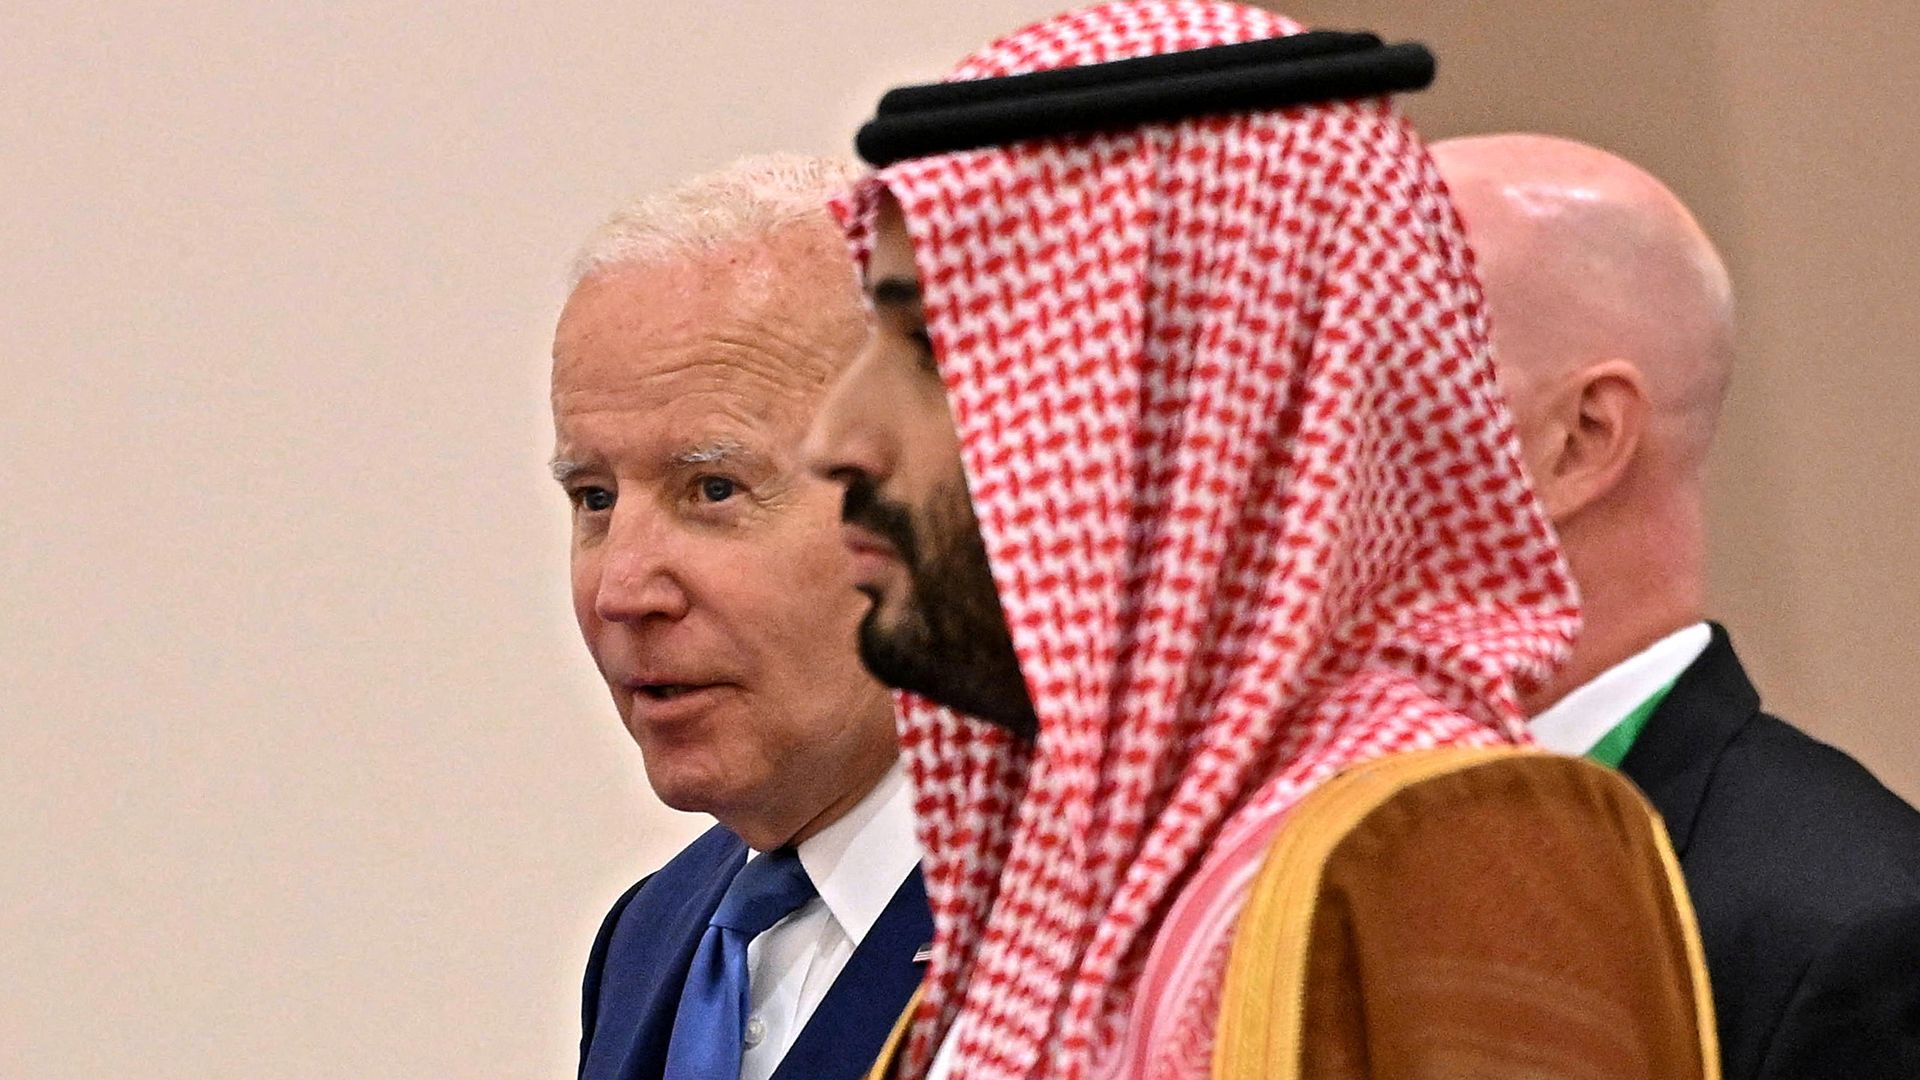 Despite Mohammed bin Salman's reputation, the U.S. needs to improve relations with Saudi Arabia and Jake Sullivan is the guy for the job.